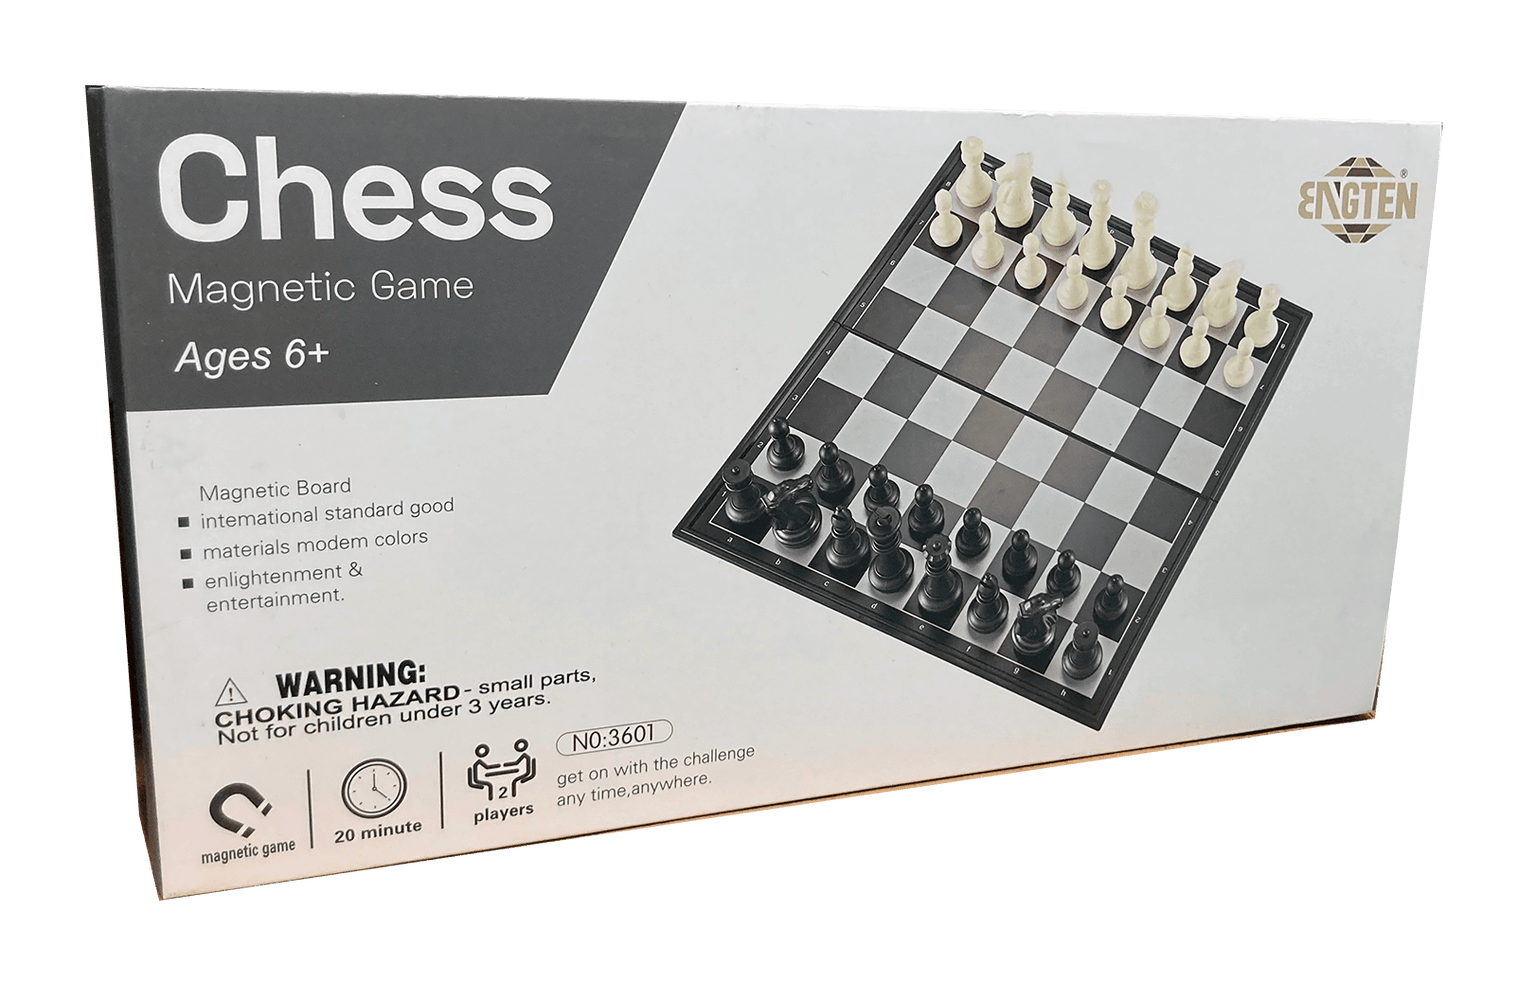 Engten Magnetic Chess Game Board, 1 pc